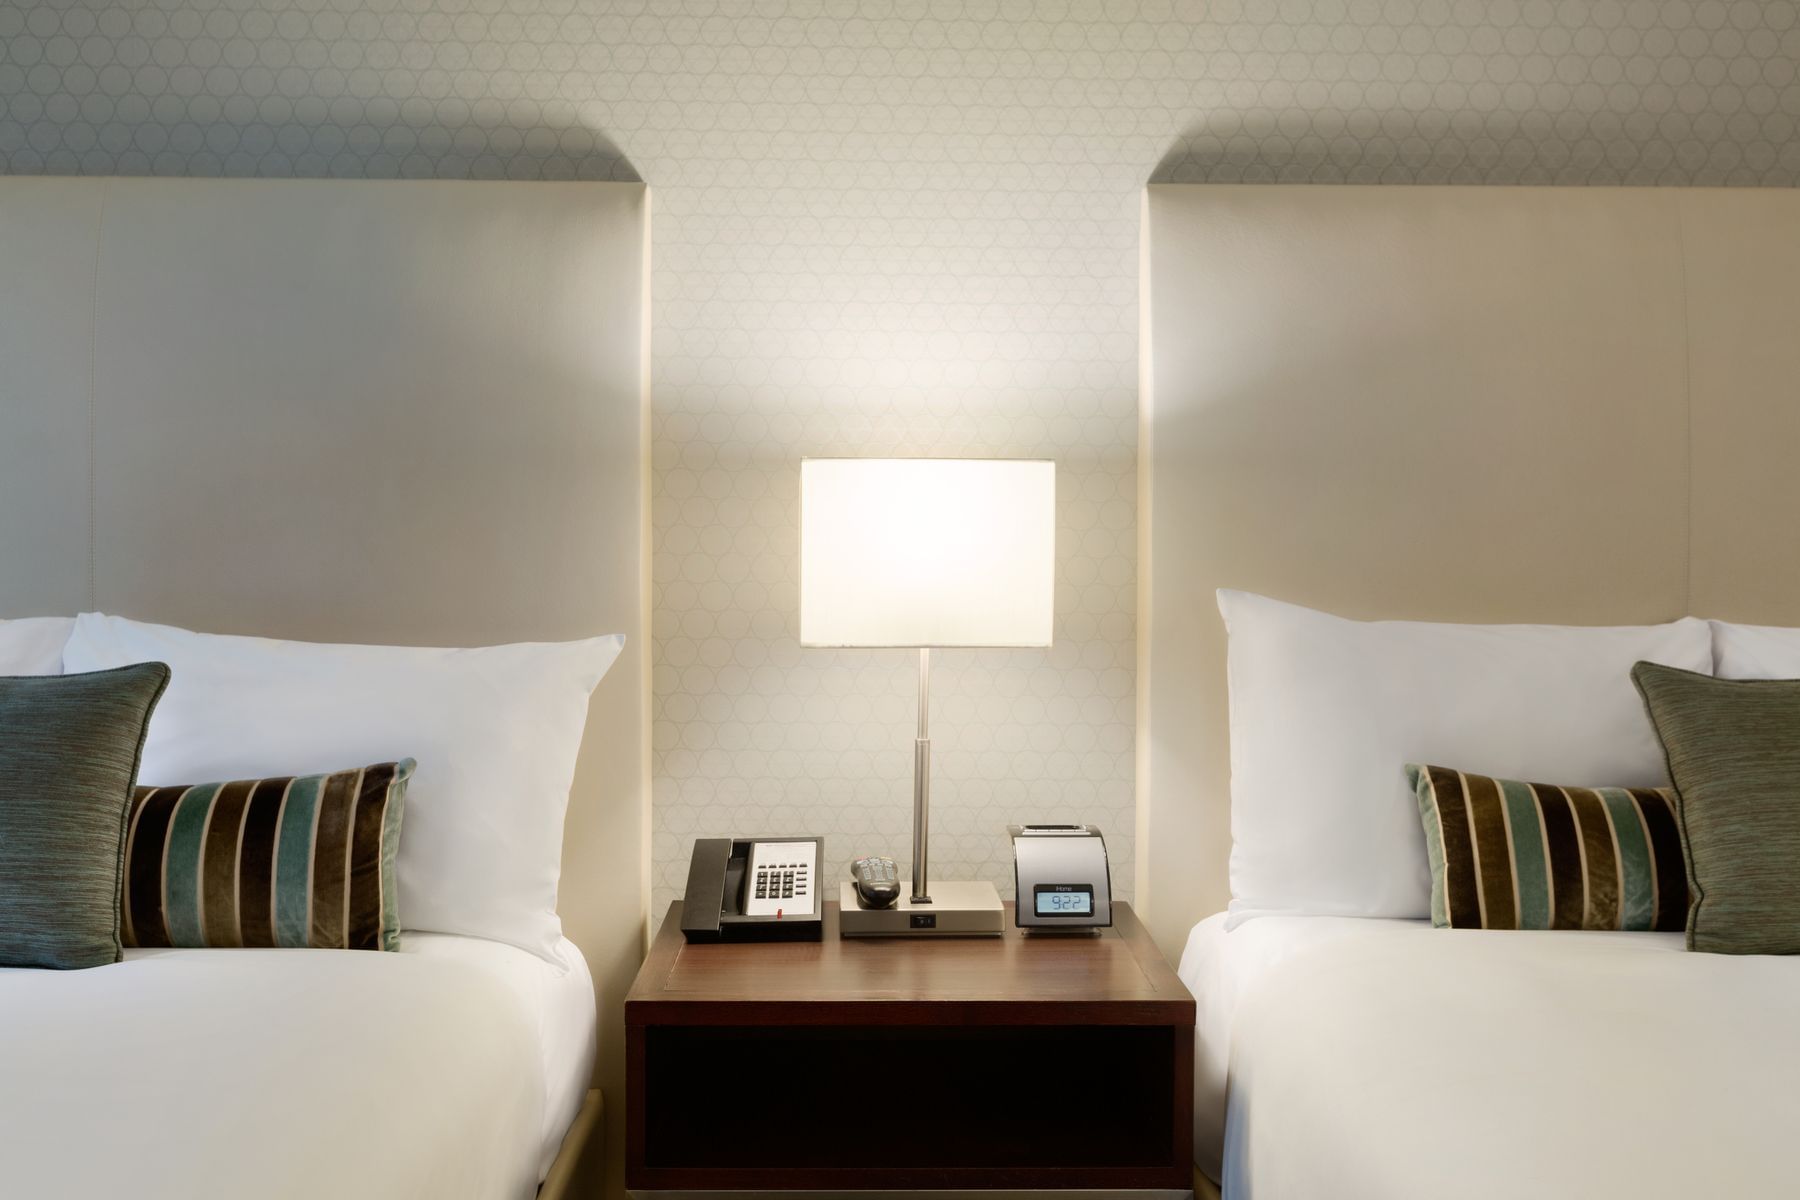 Night stand and lamp in-between two beds in hotel room